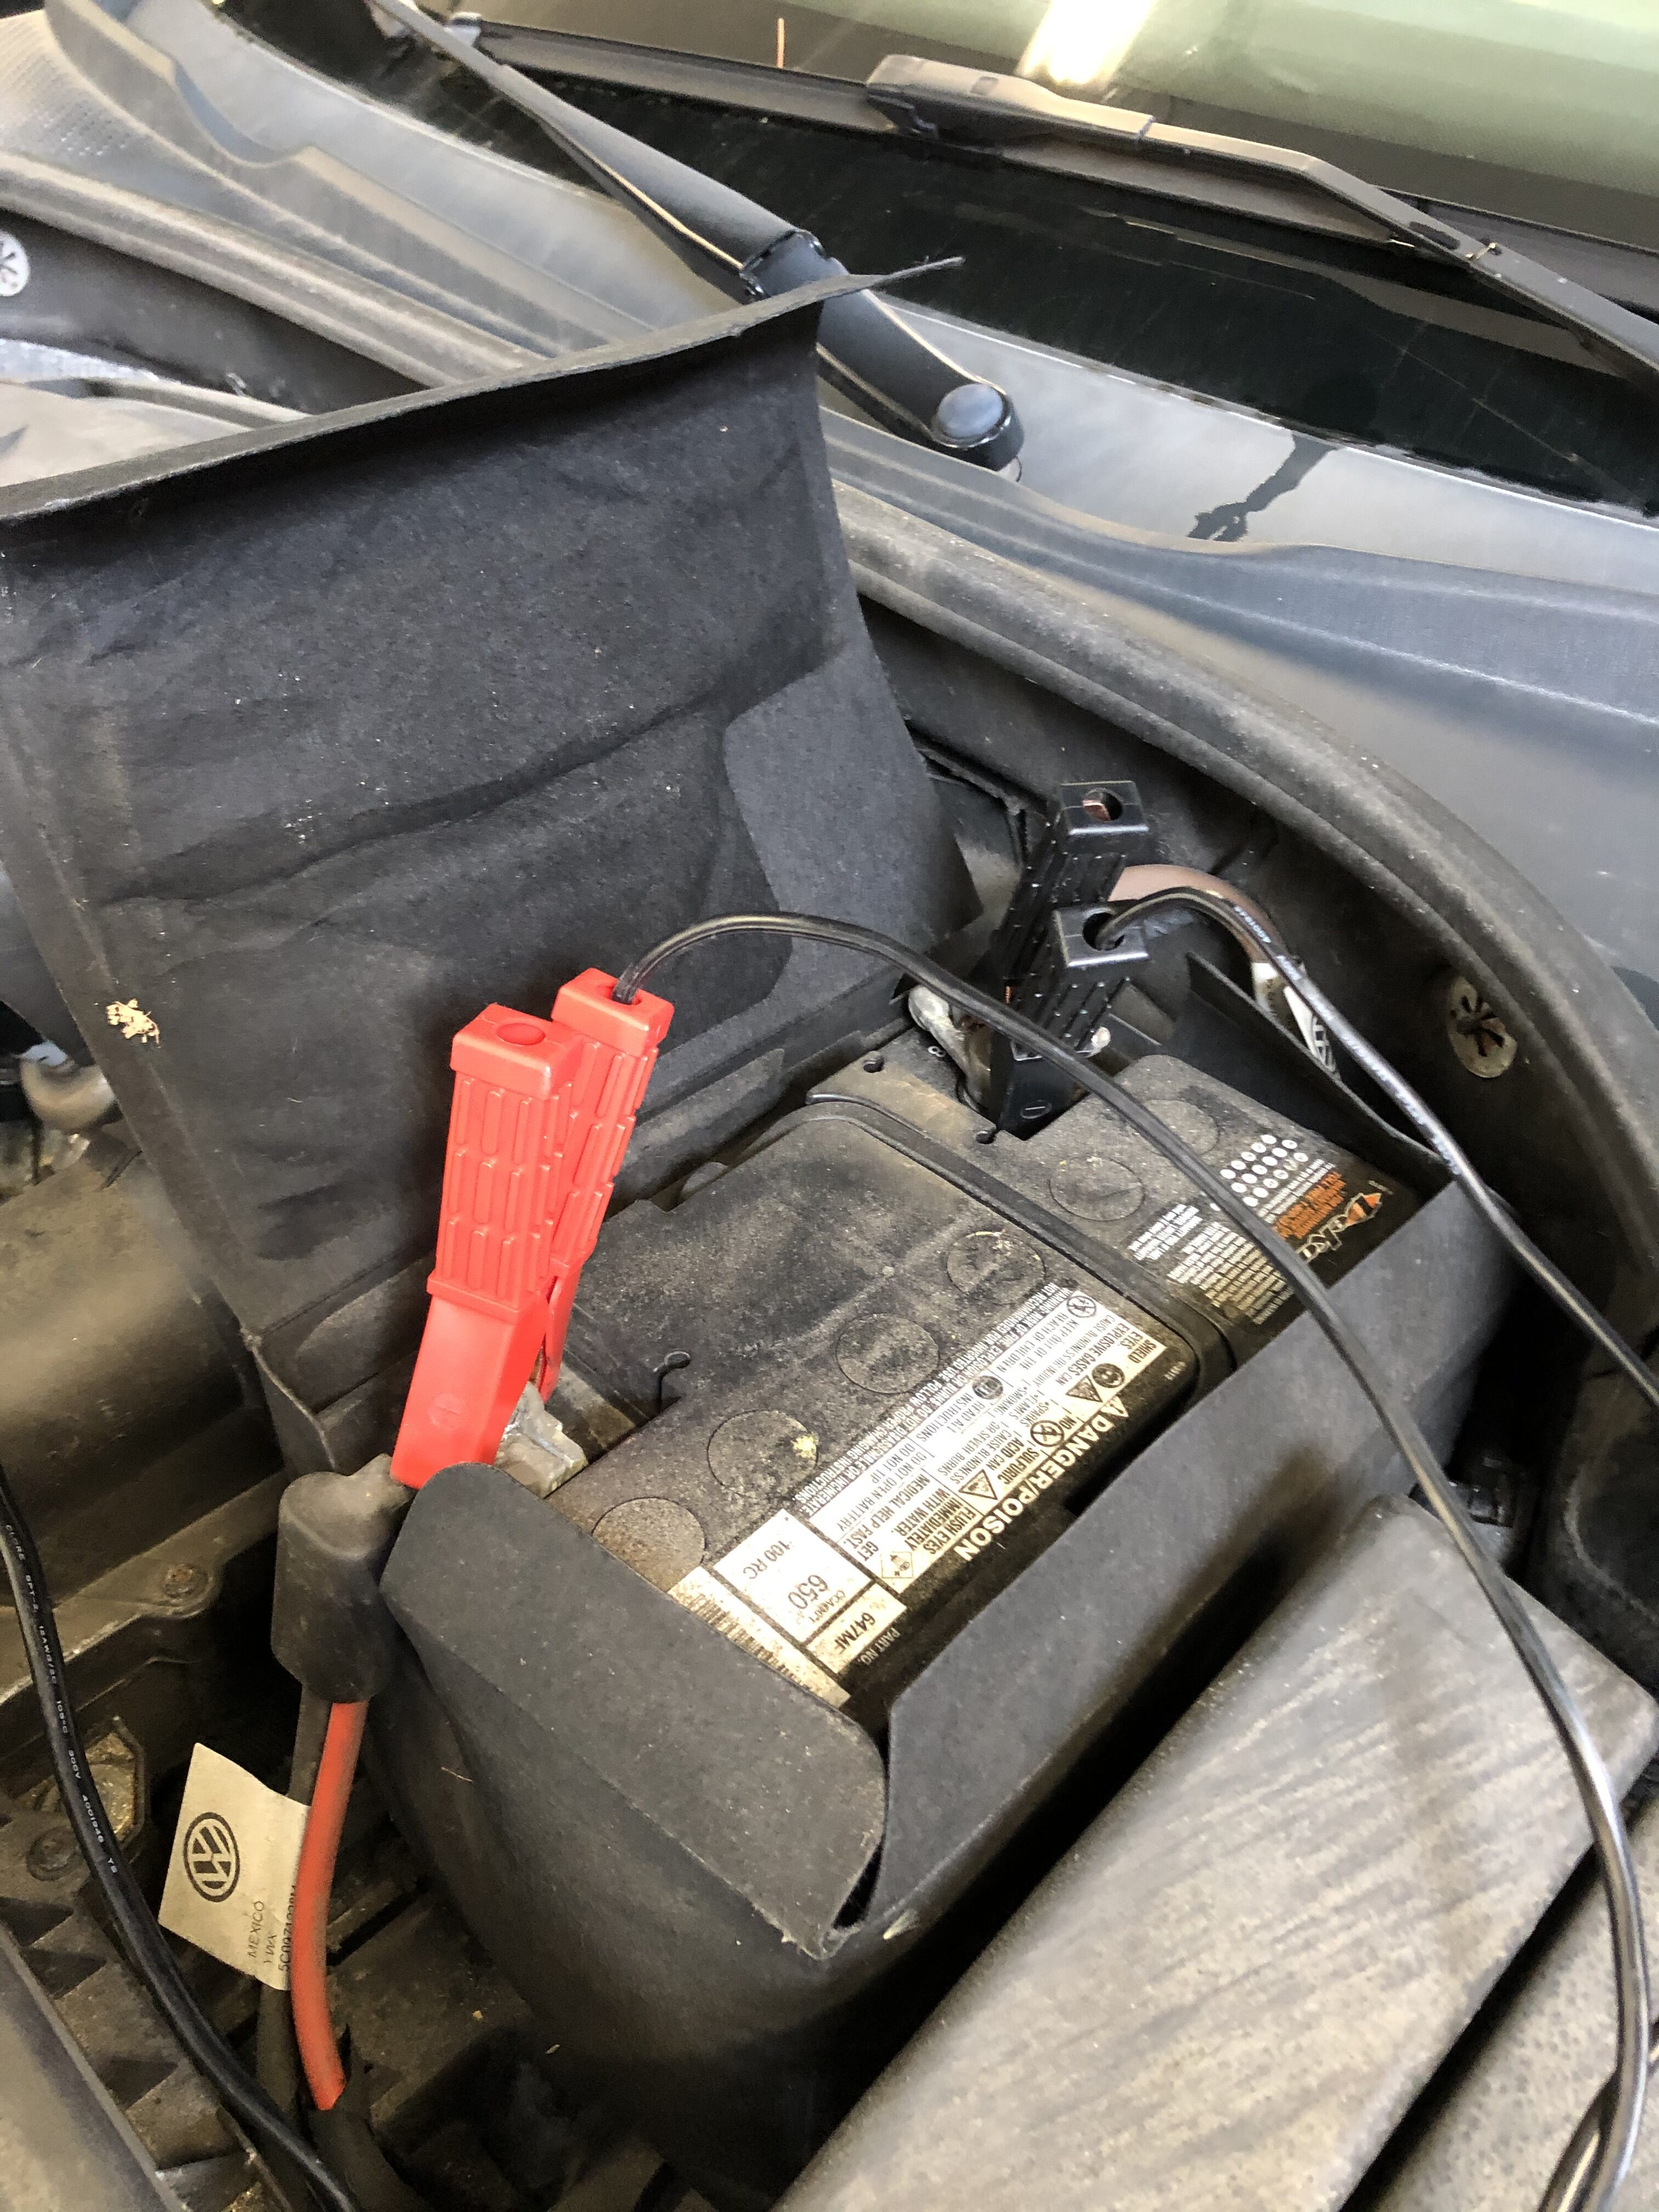 Why does my car battery keep dying?